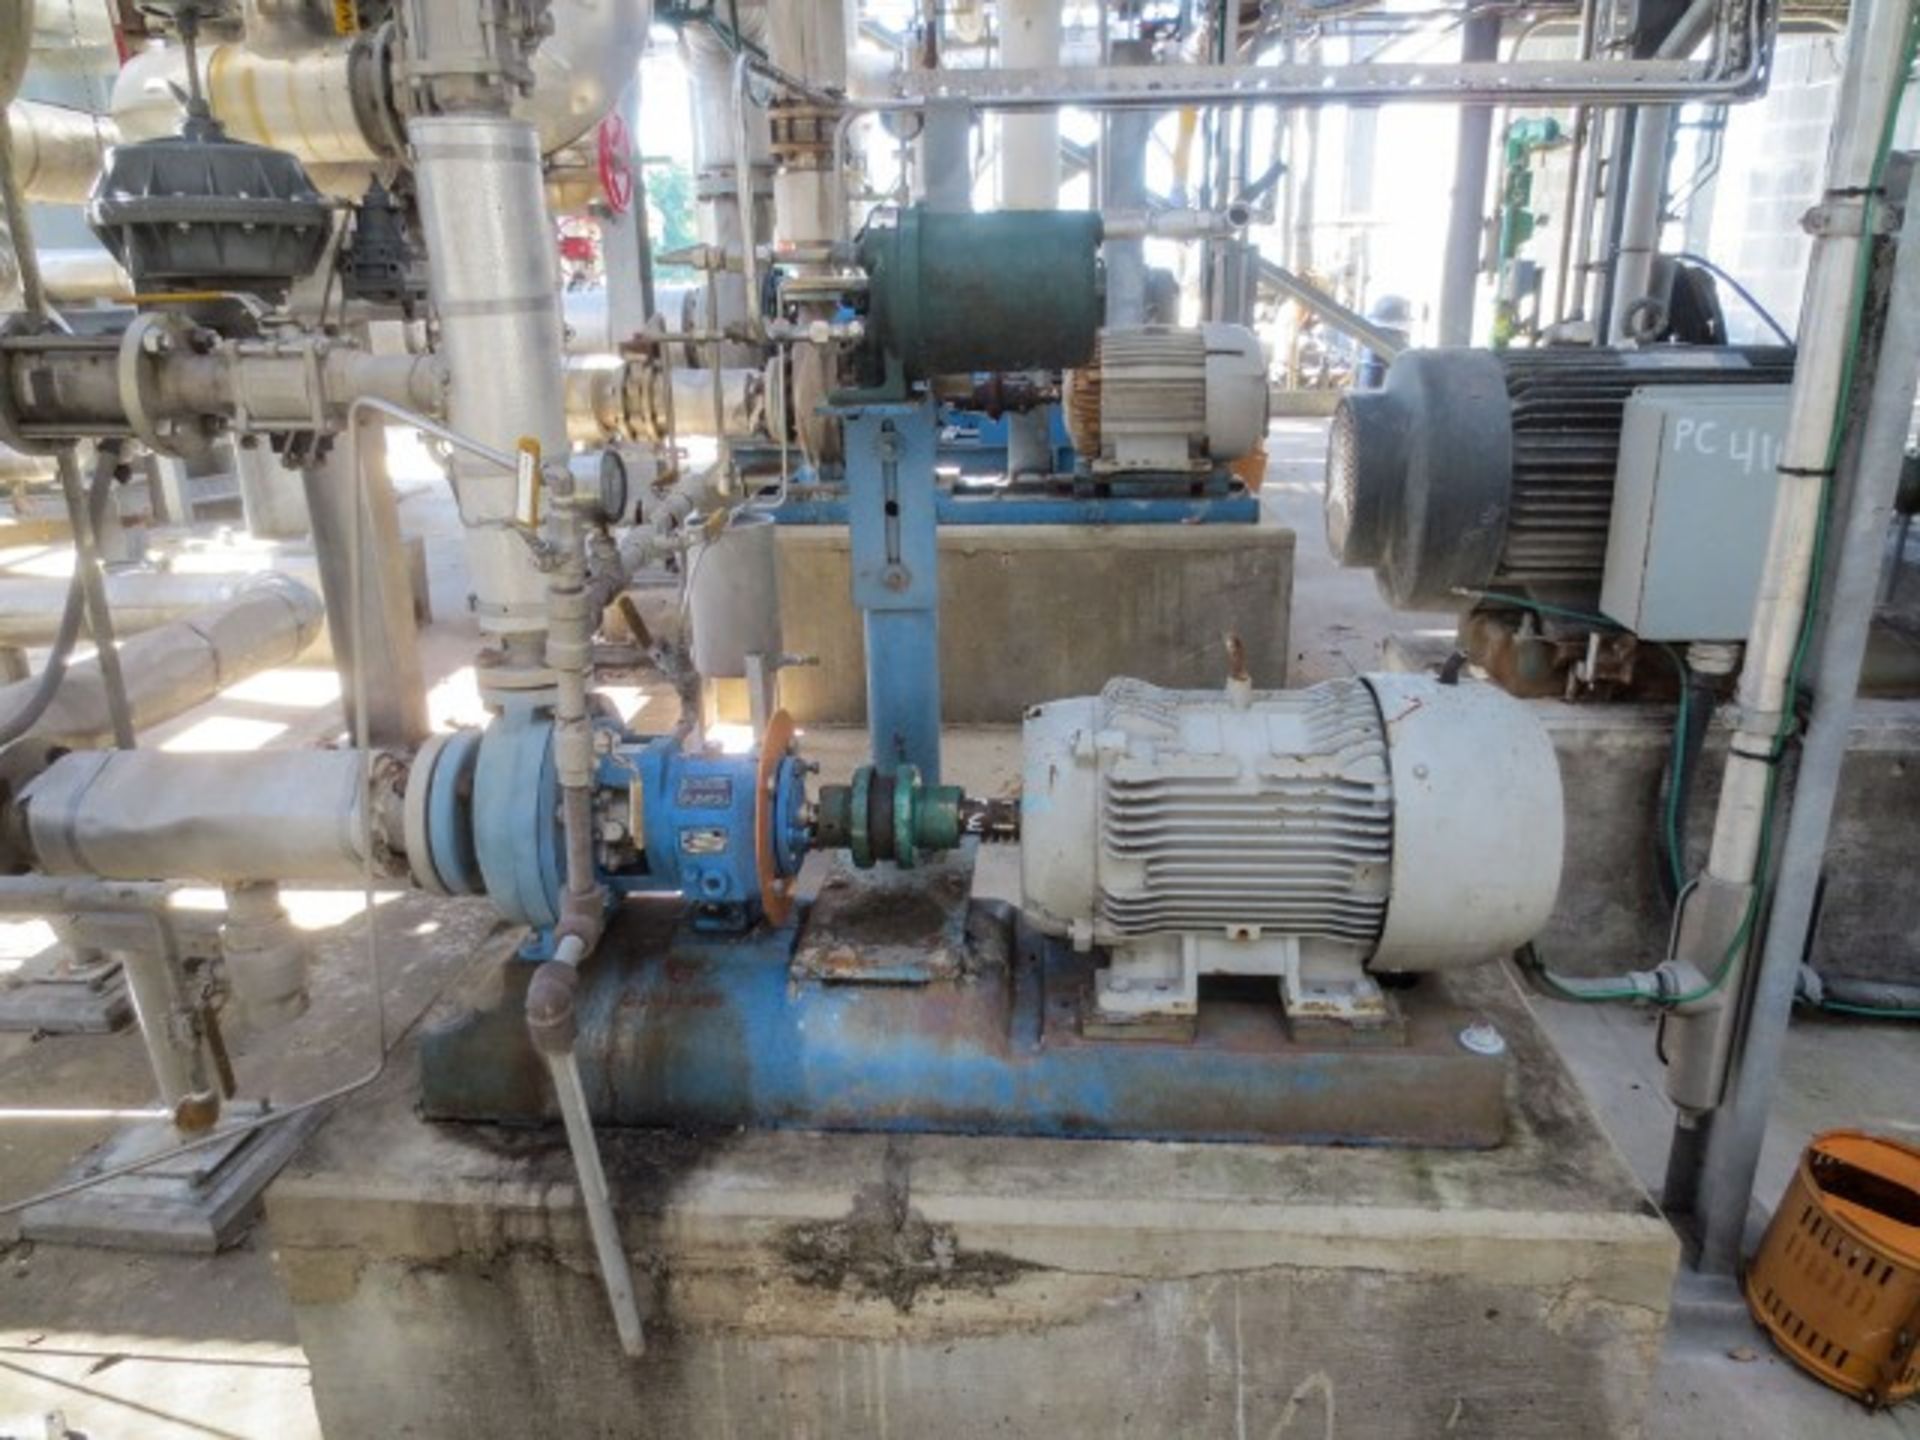 Goulds centrifugal pump, model 3196 STX. Stainless steel 316, size Rigging/Loading Fee: $650